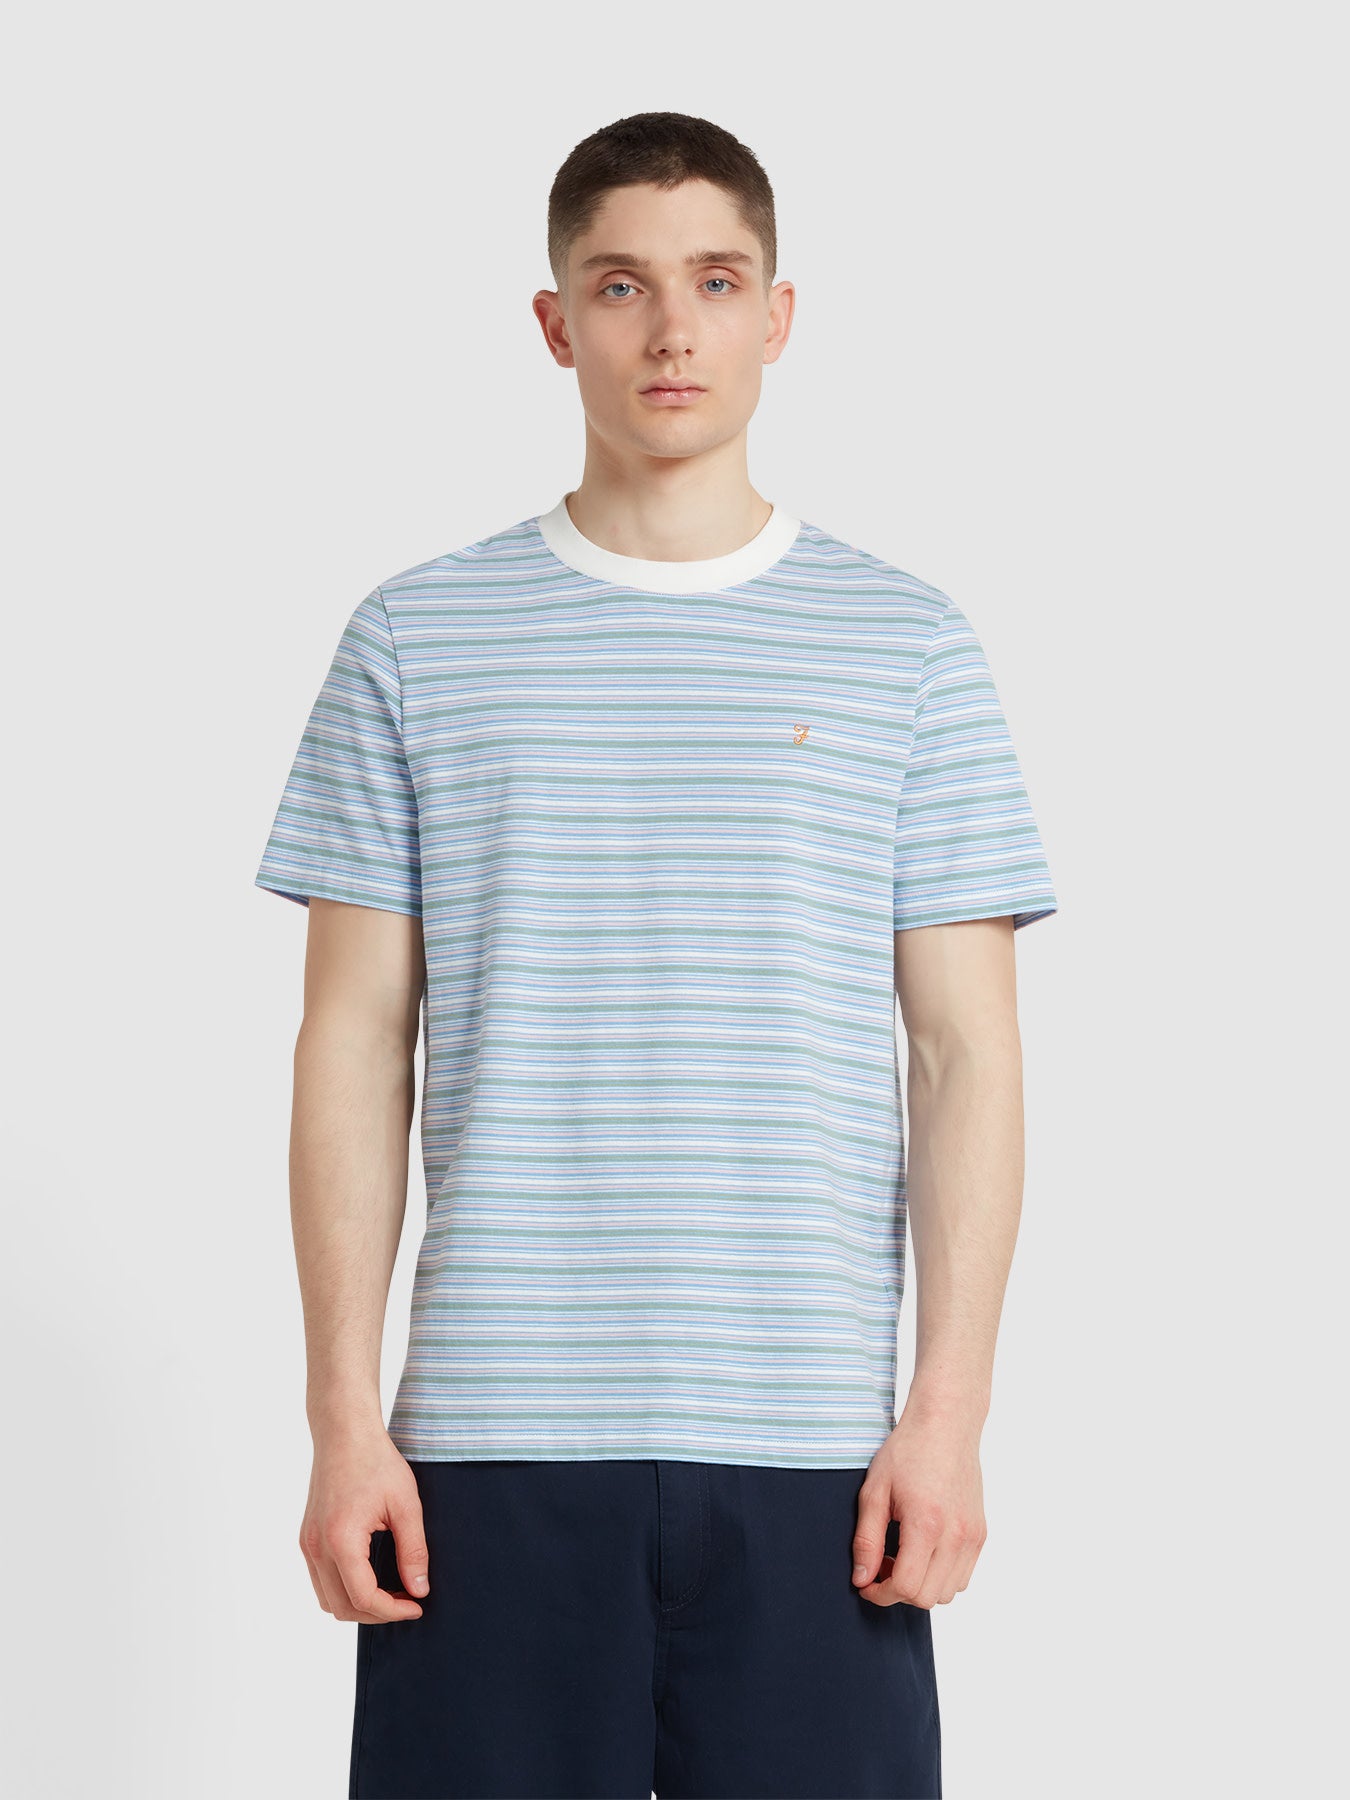 View Danny Stripe Short Sleeve TShirt In Arctic Blue information